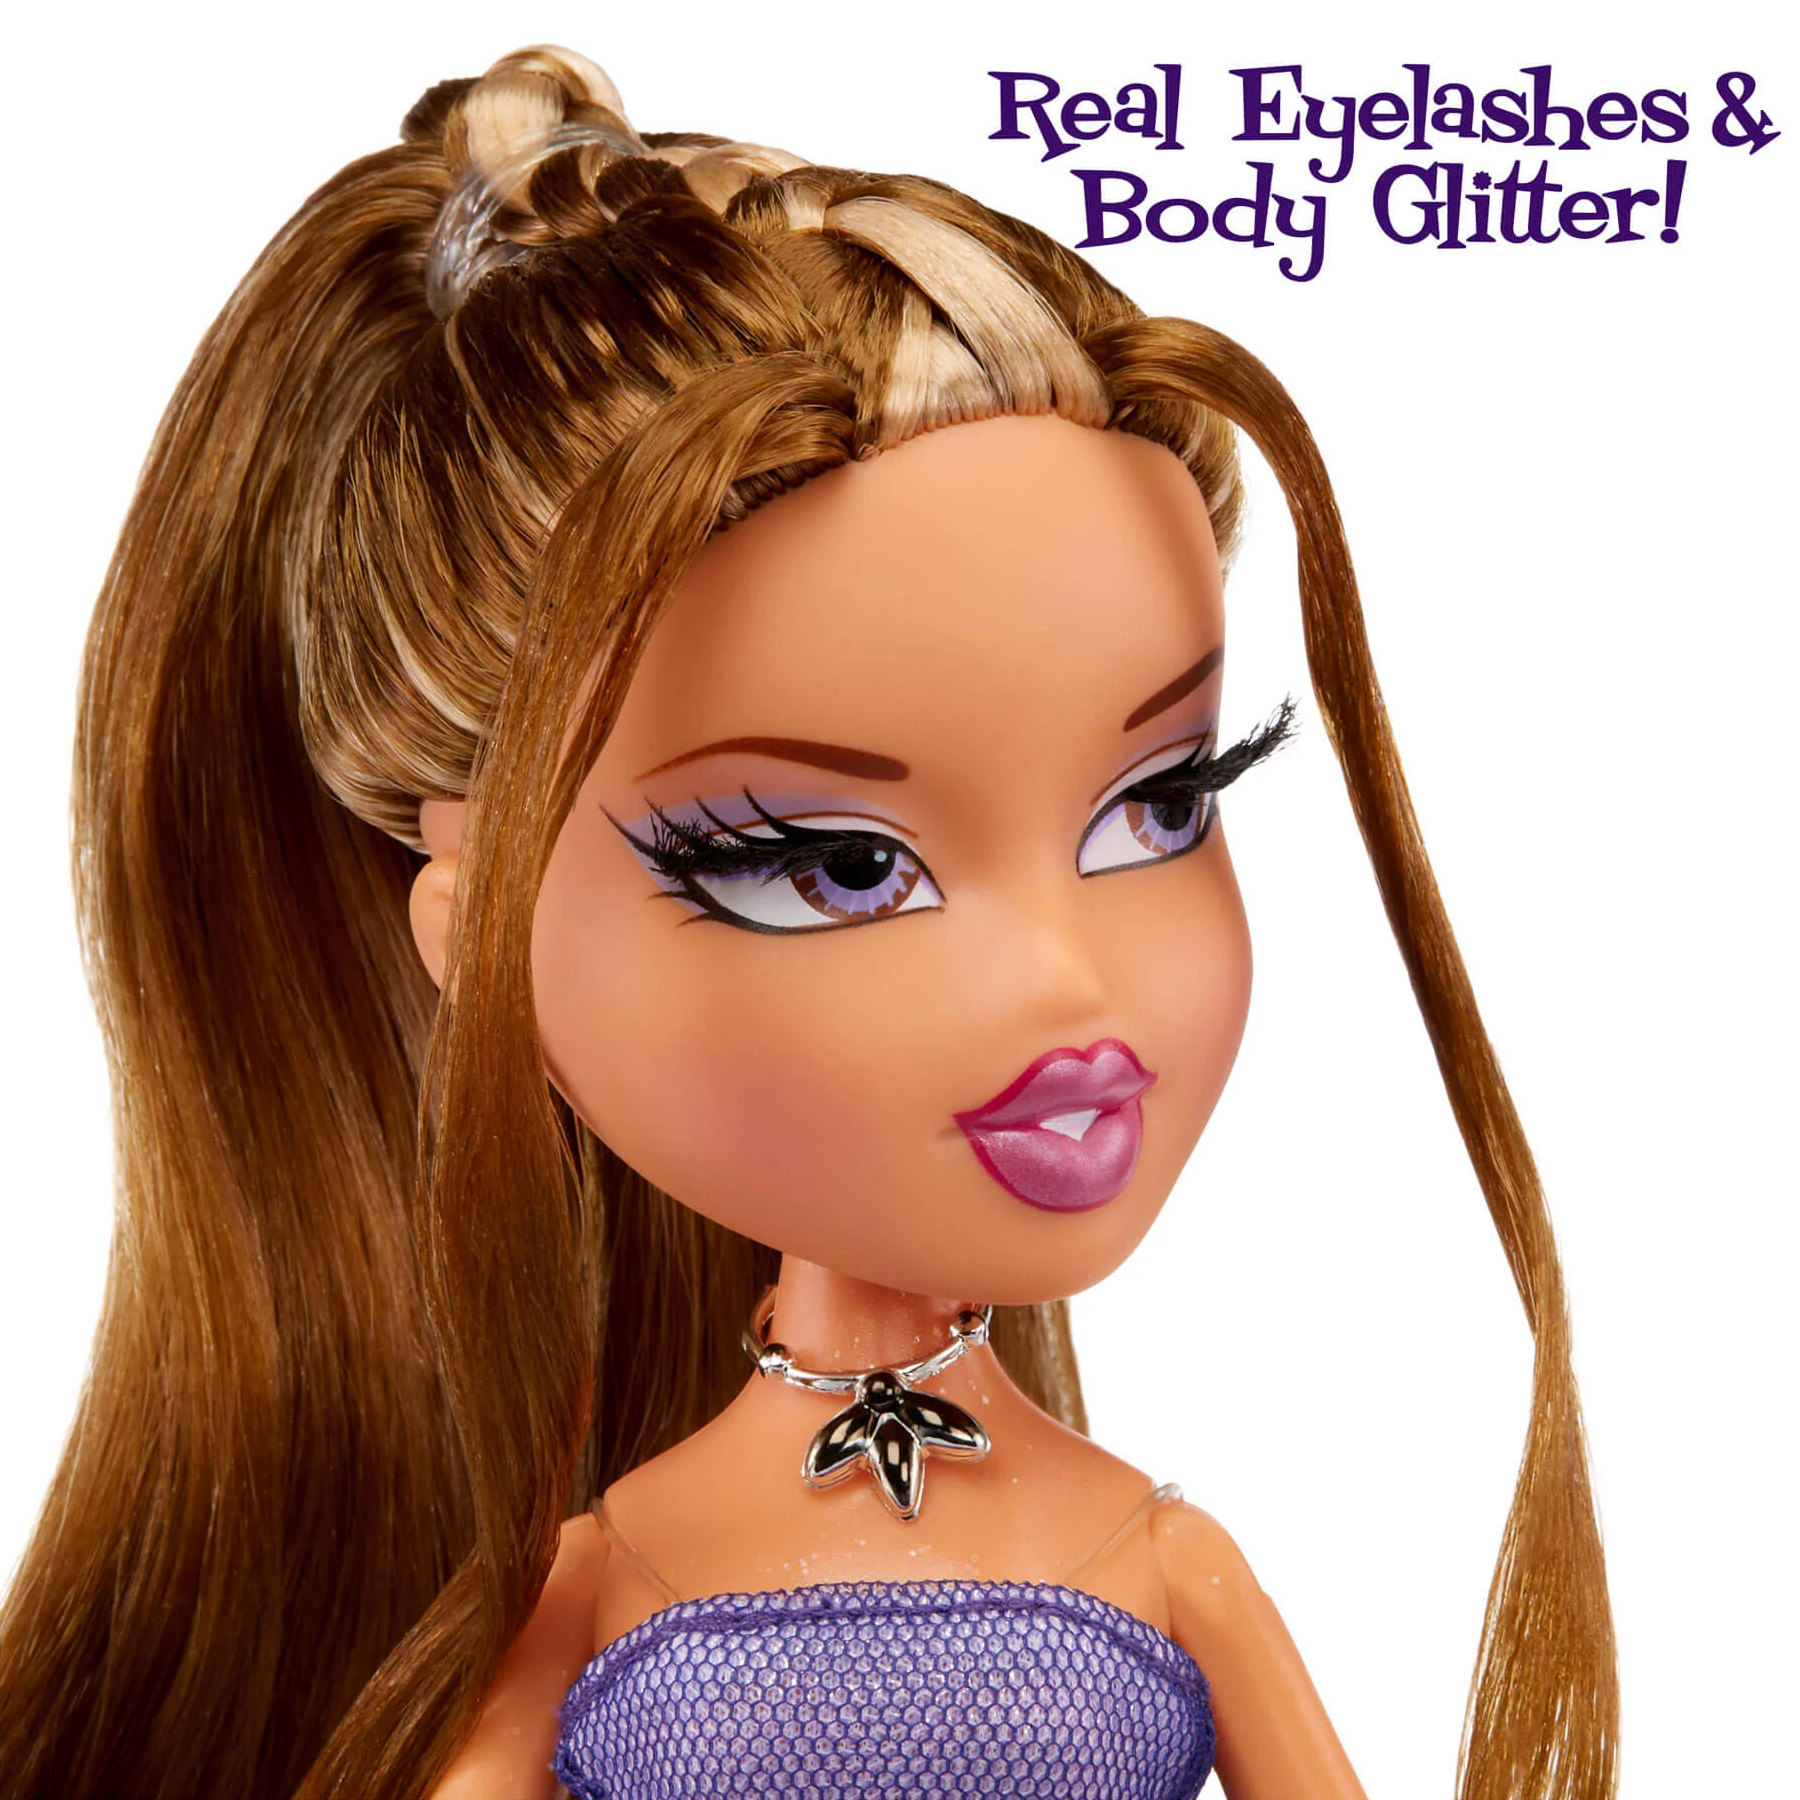 Sparkles, spunk & sex appeal: how Bratz became today's cool-girl